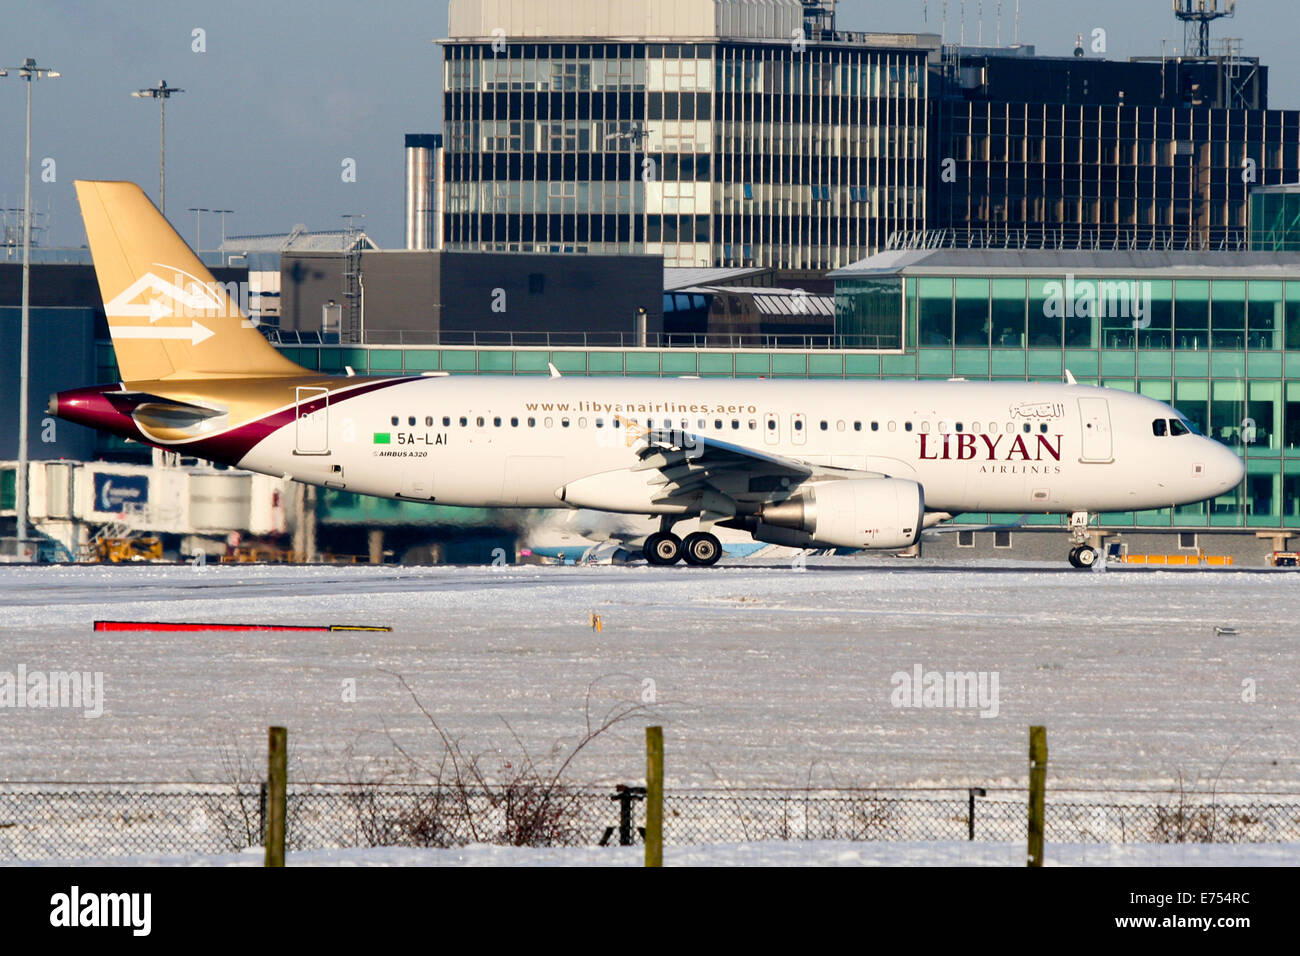 Libyan Airlines Airbus A320 arrives into Manchester airport. The aircraft has since been destroyed by rebels in Libya. Stock Photo